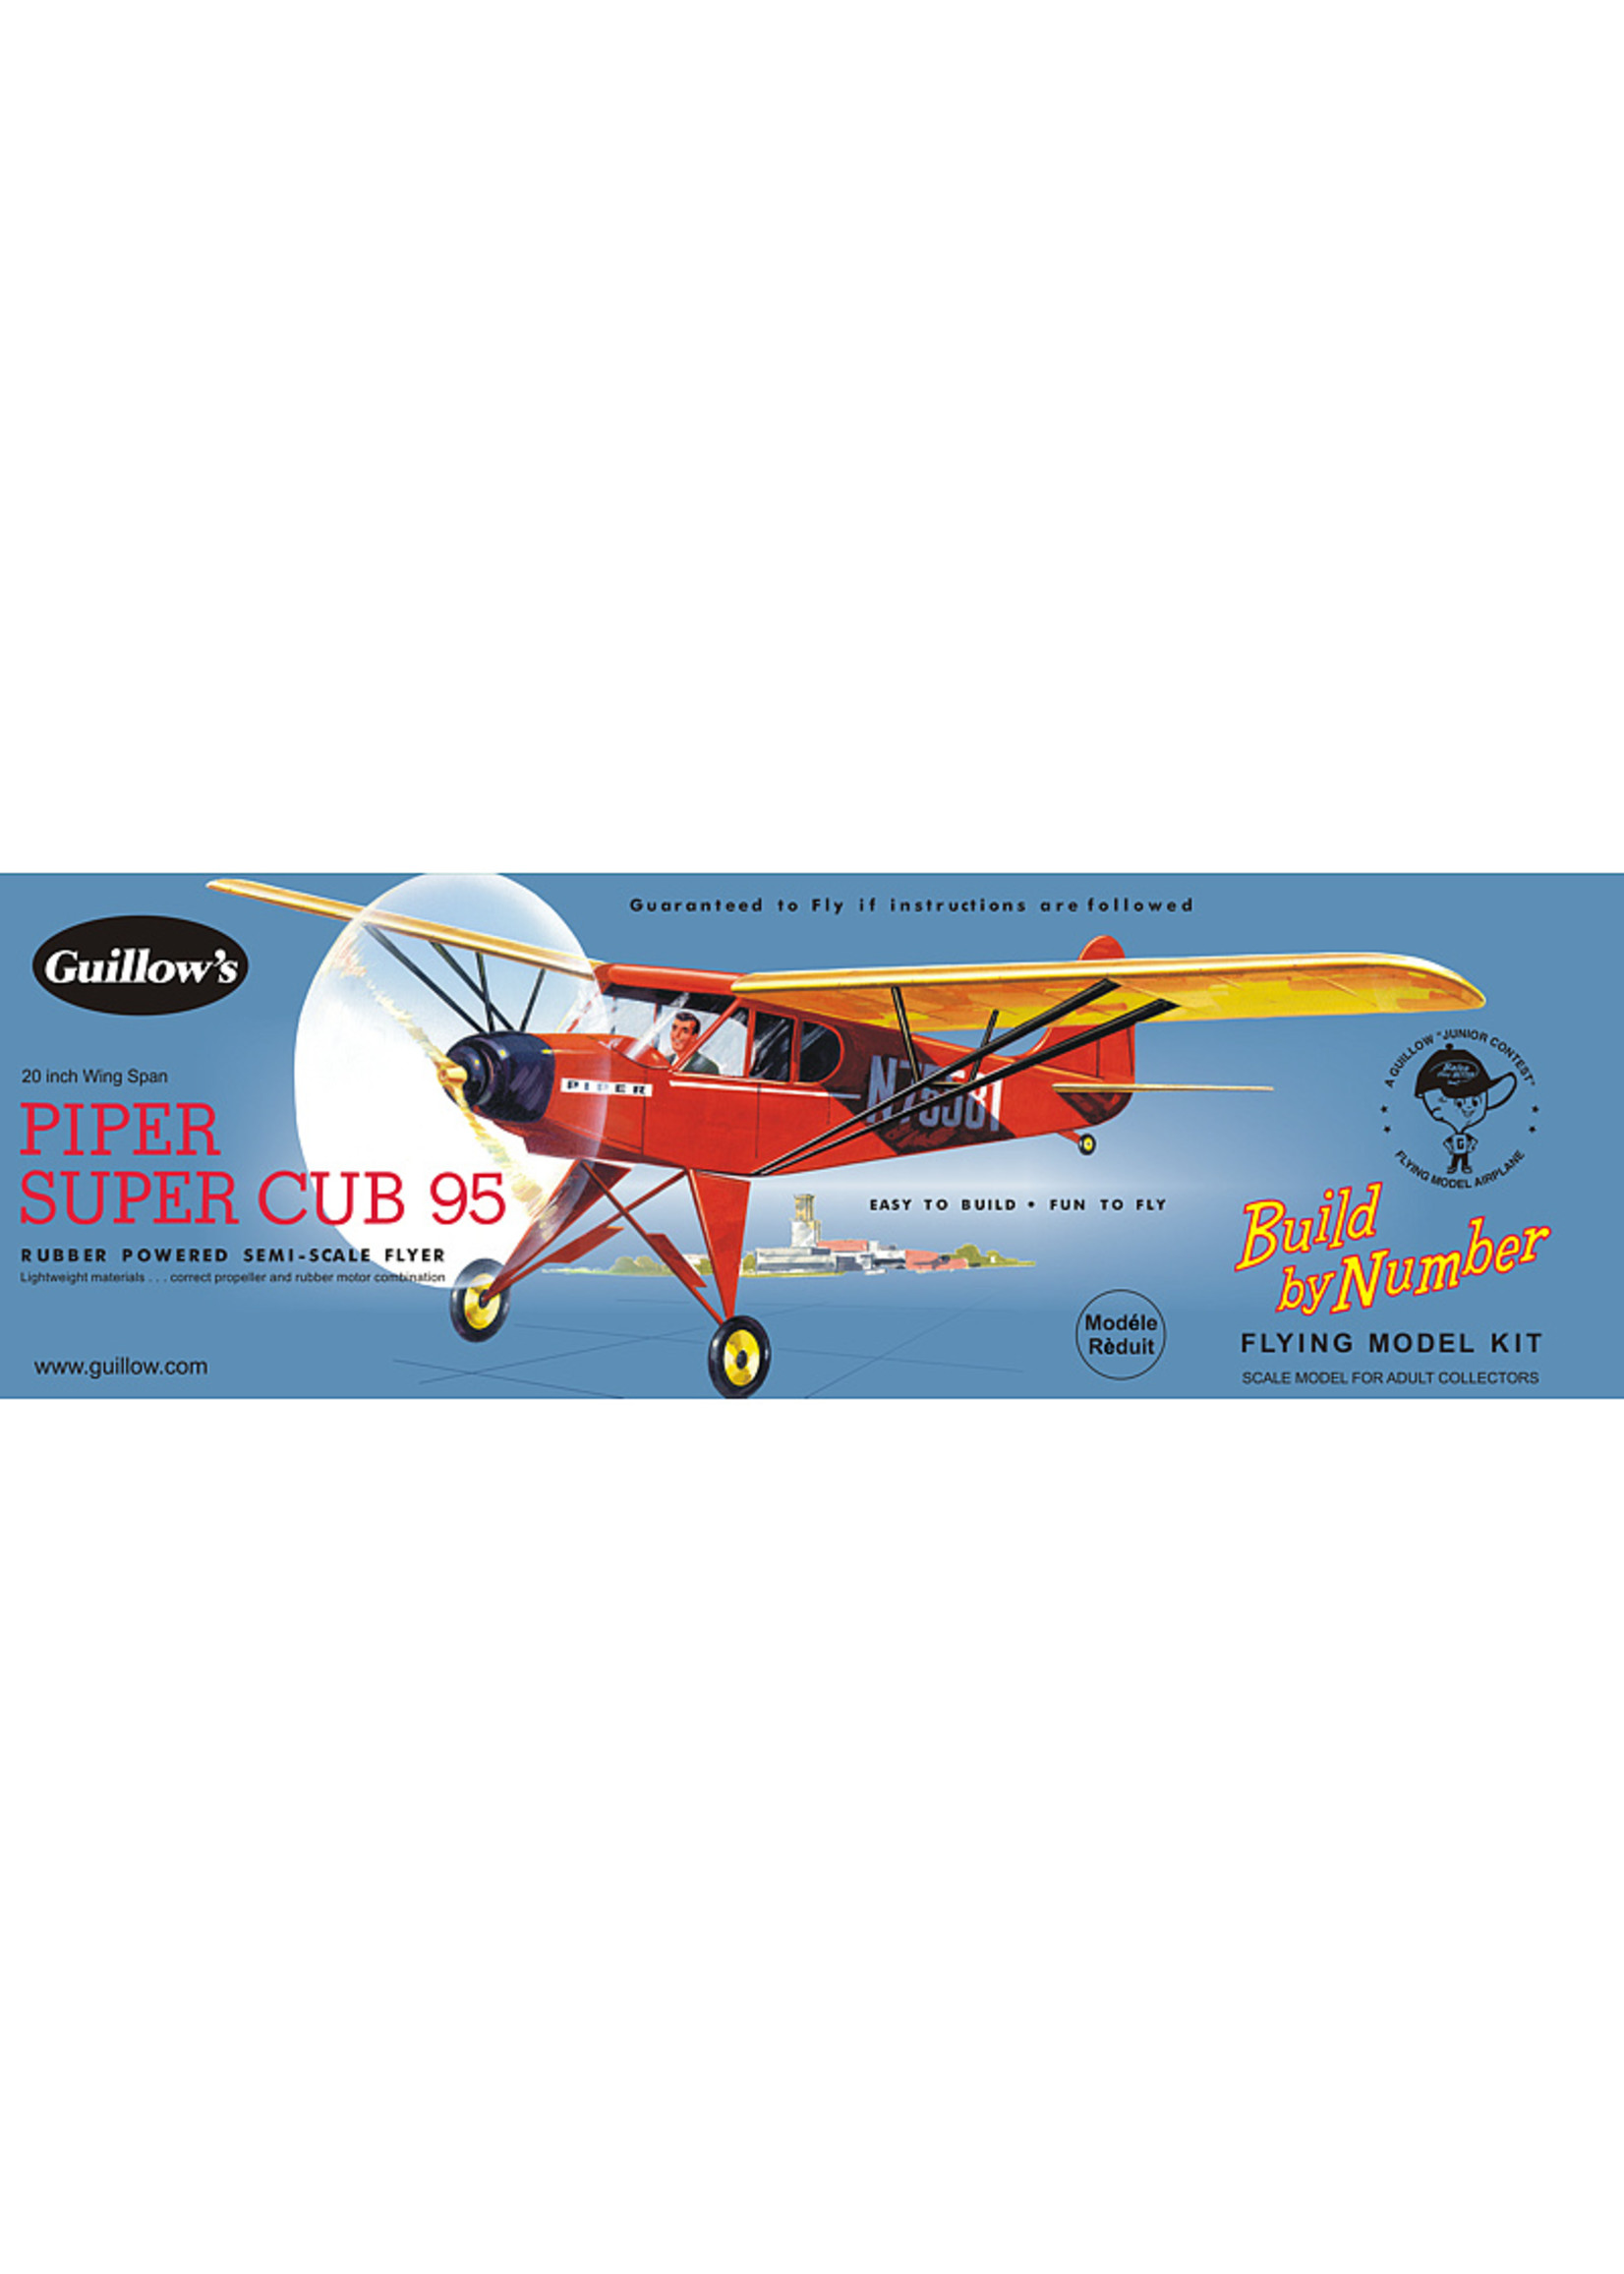 Guillows Piper Super Cub 95 - Balsa Build By Number Plane Kit